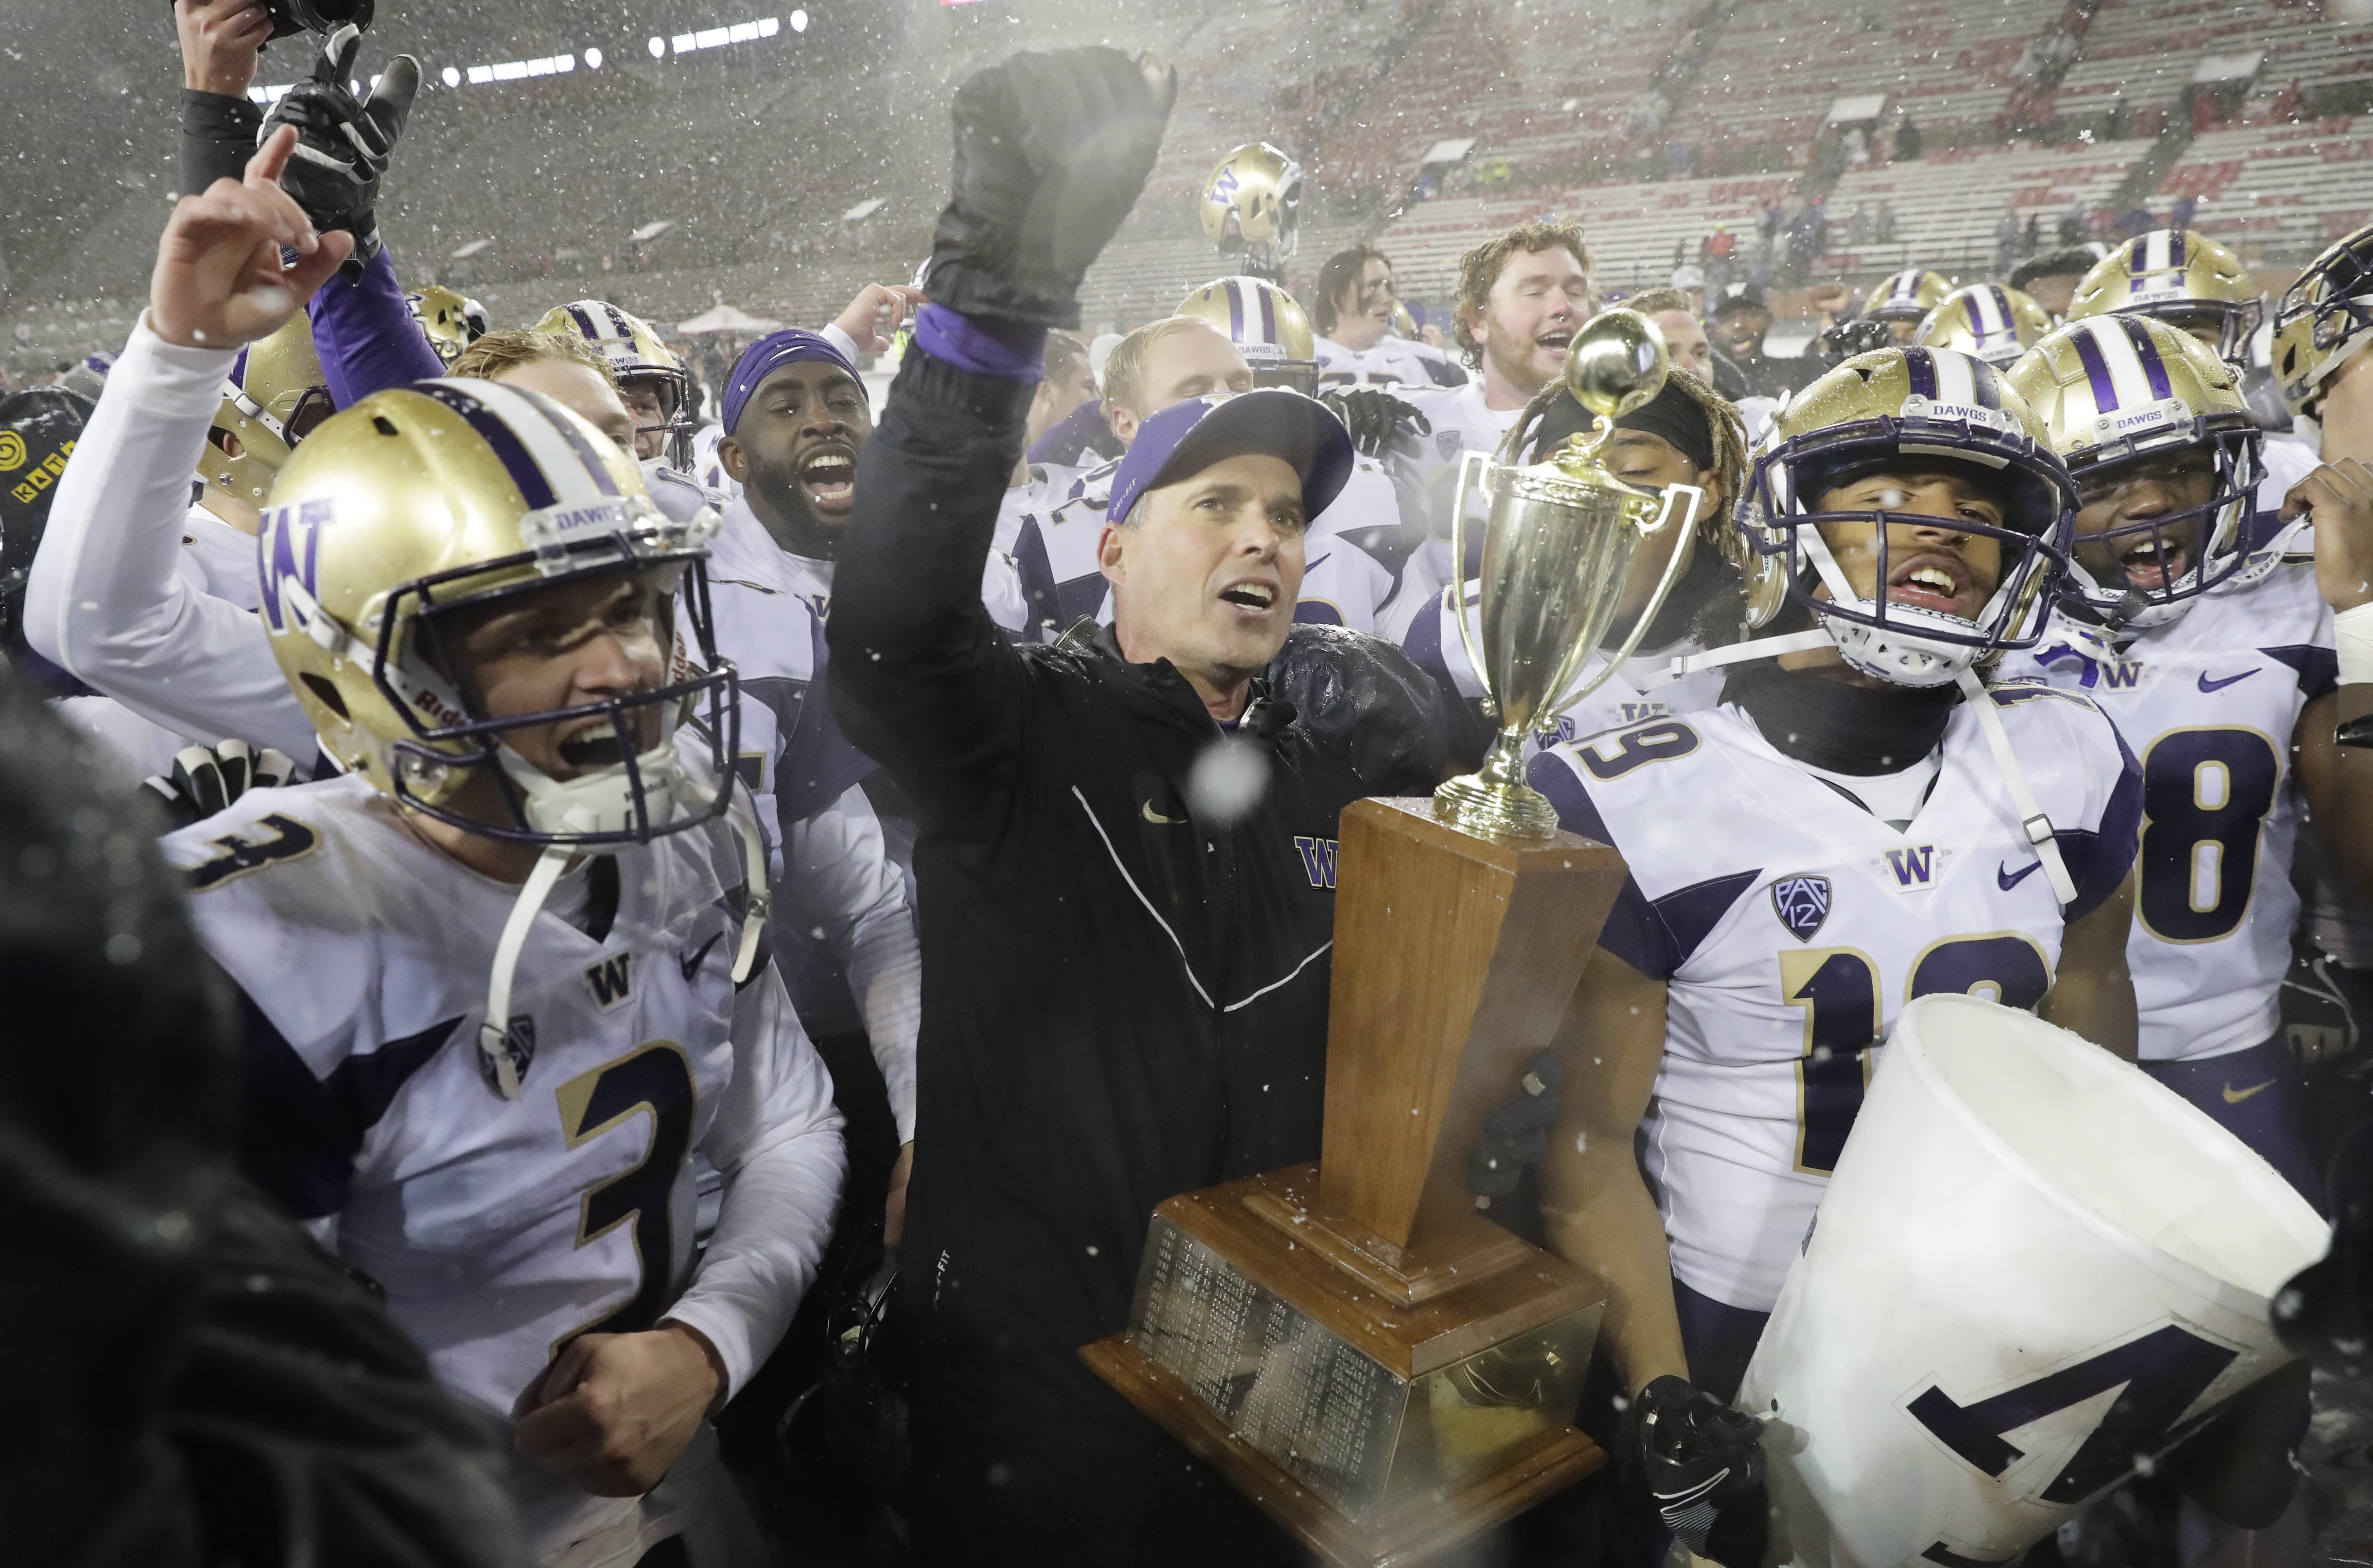 Washington coach Chris Petersen, center, holds the Apple Cup trophy as he celebrates with quarterback Jake Browning, left, and the rest of the team after Washington defeated Washington State 28-15 in an NCAA college football game Friday, Nov. 23, 2018, in Pullman, Wash. (AP Photo/Ted S.